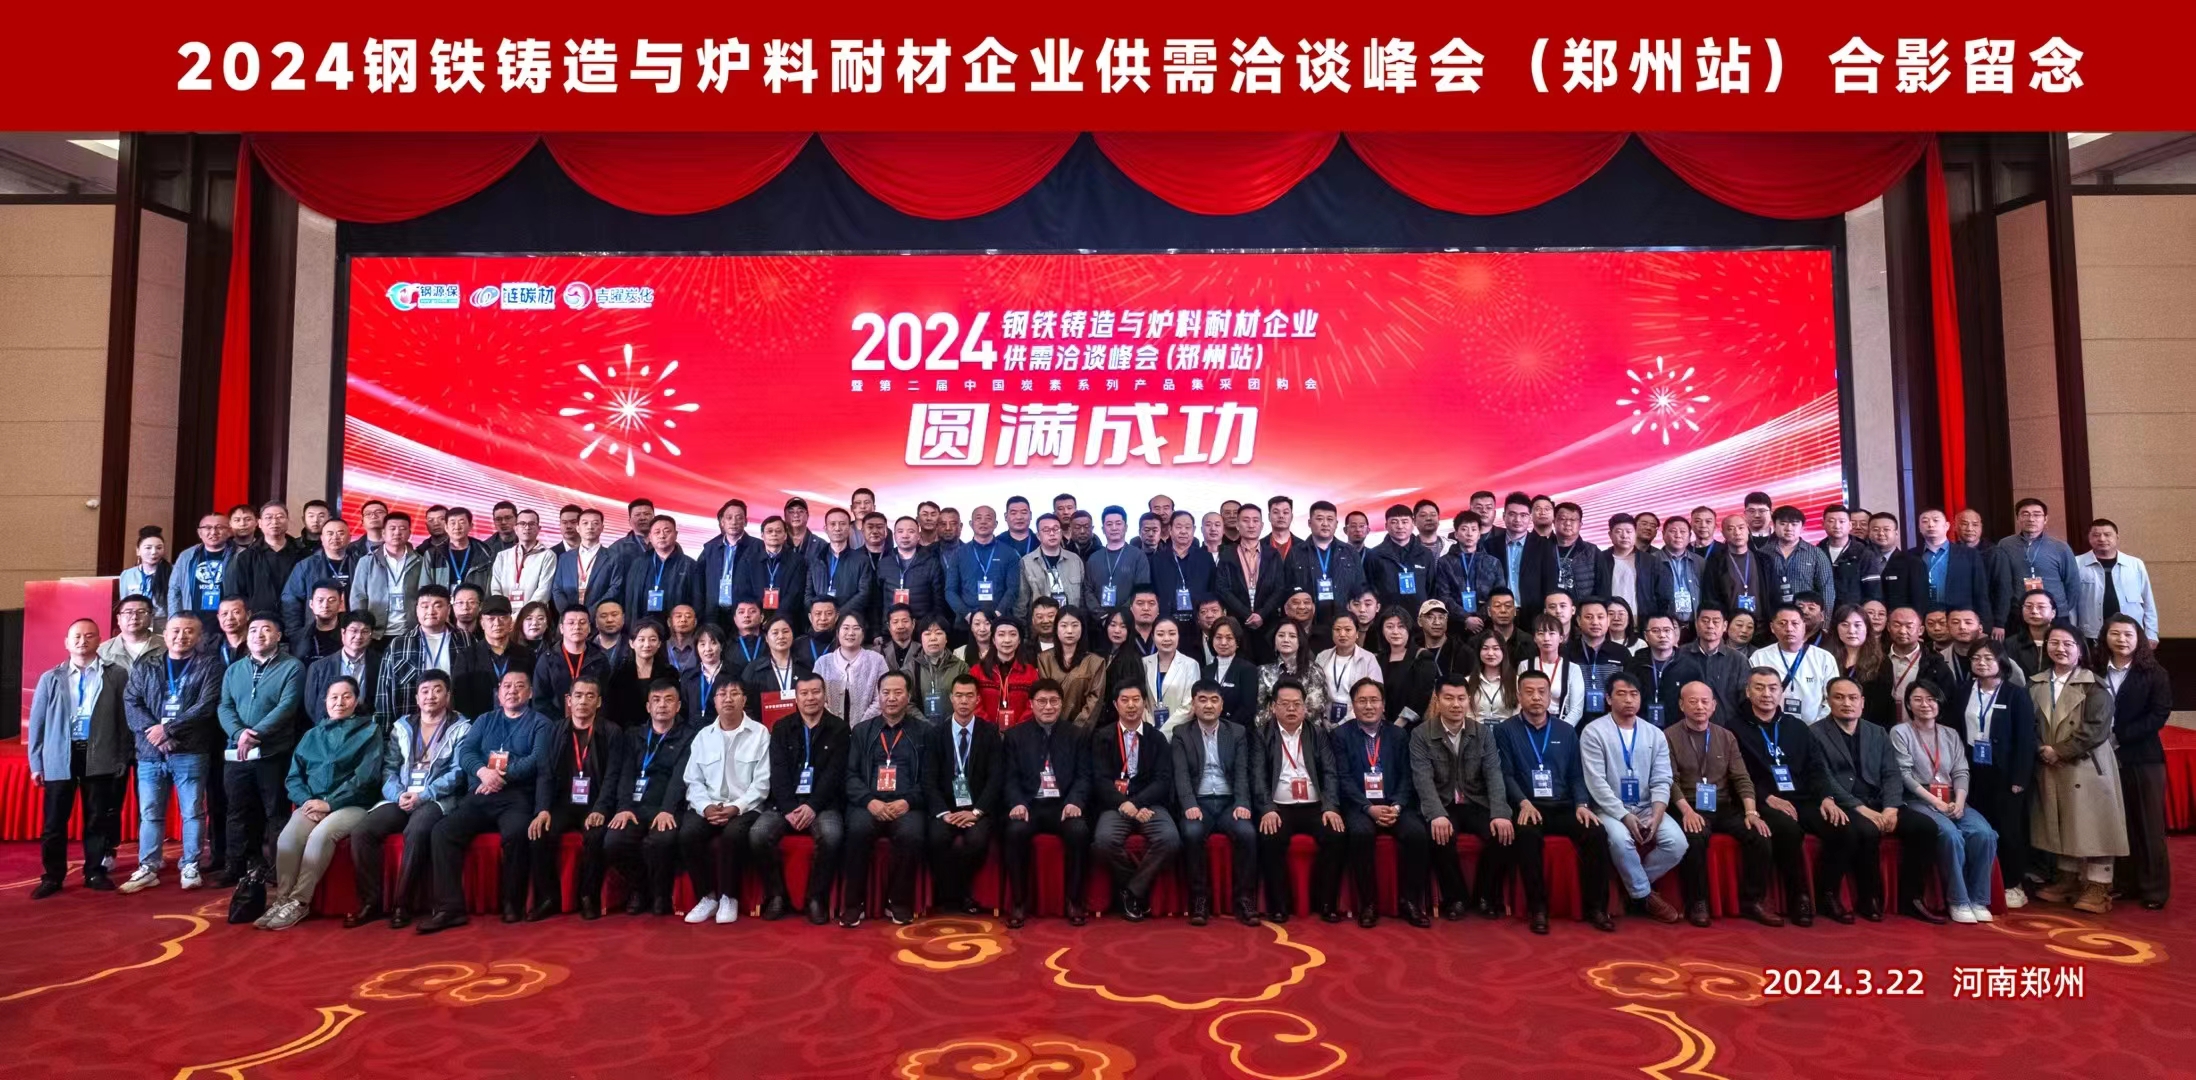 Jiyao won the "Competitive Brand of Carbon Additives" award!